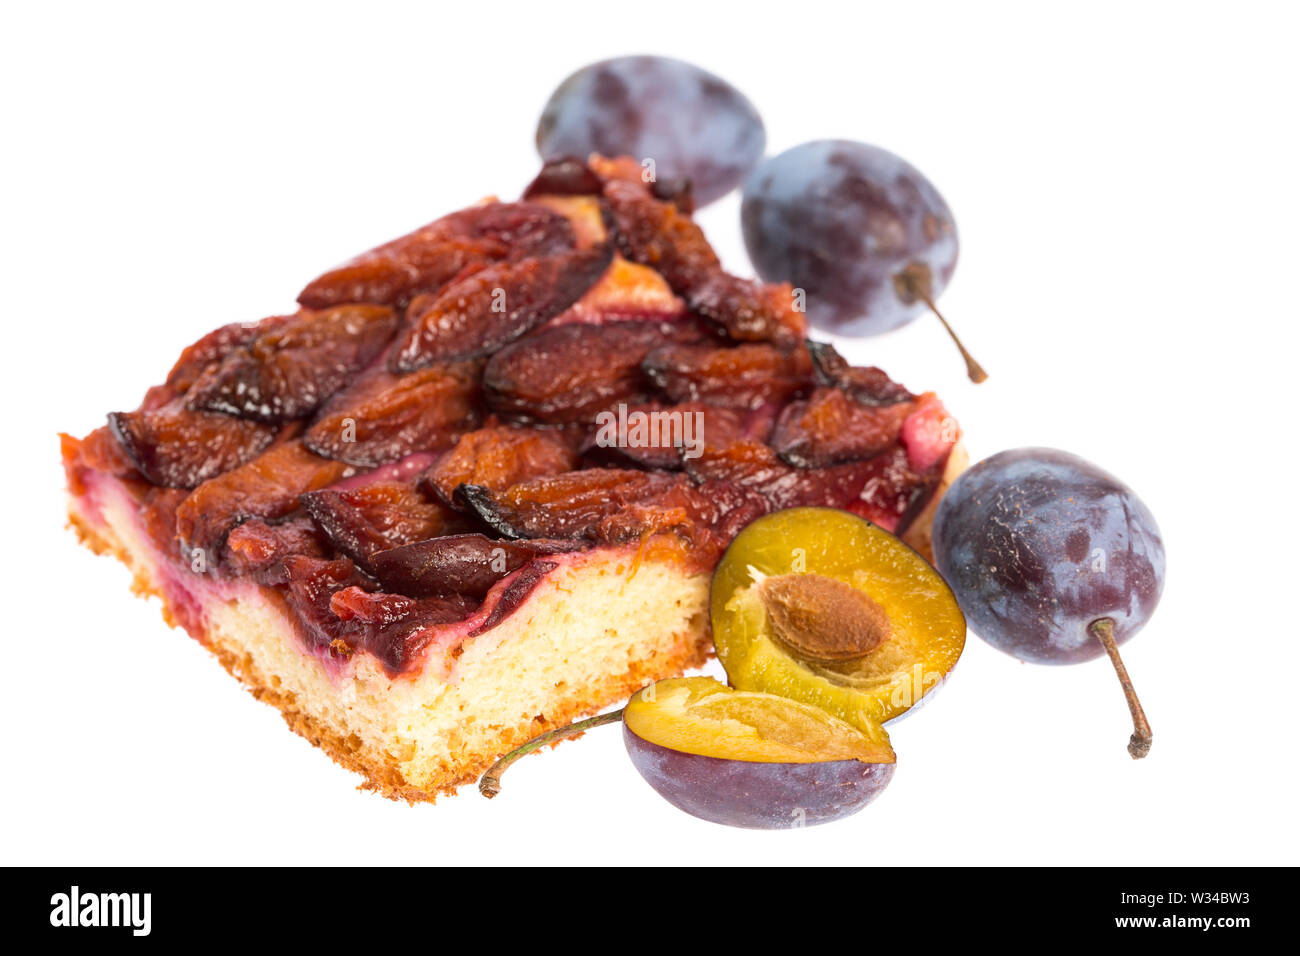 Plum cake with fresh plums isolated on white background Stock Photo